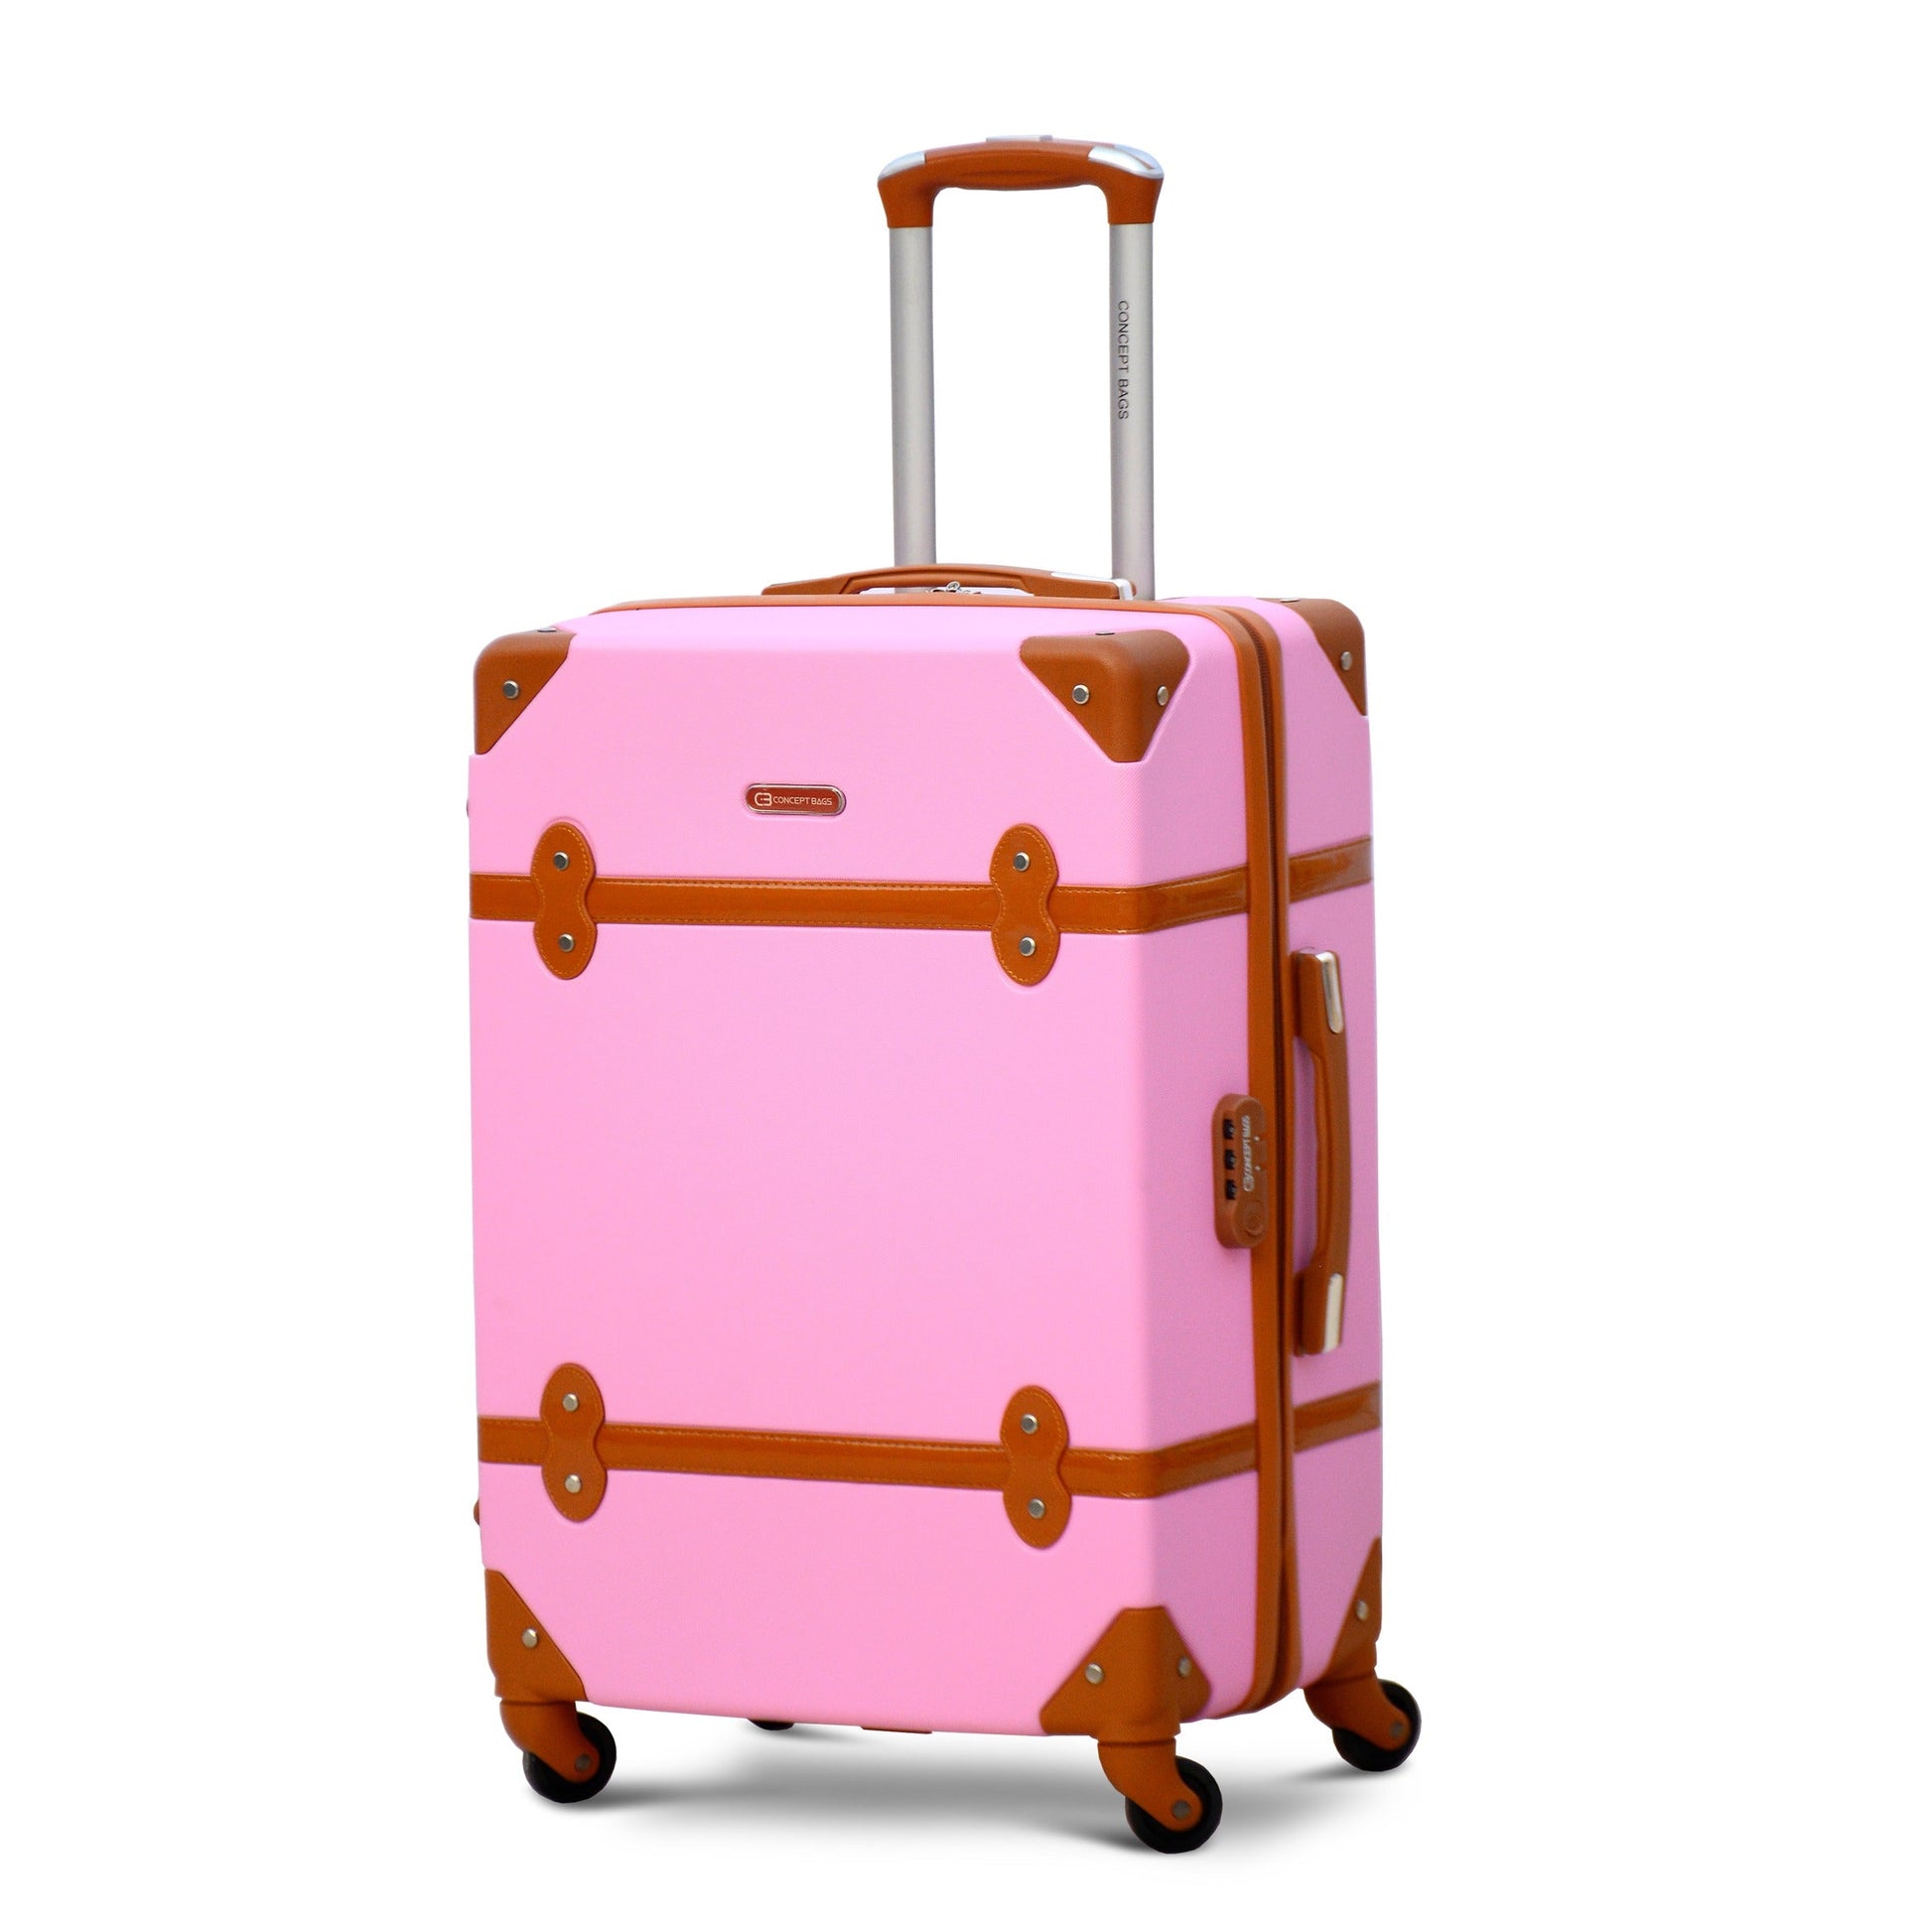 Corner guard lightweight 28 inch low price pink colour luggage